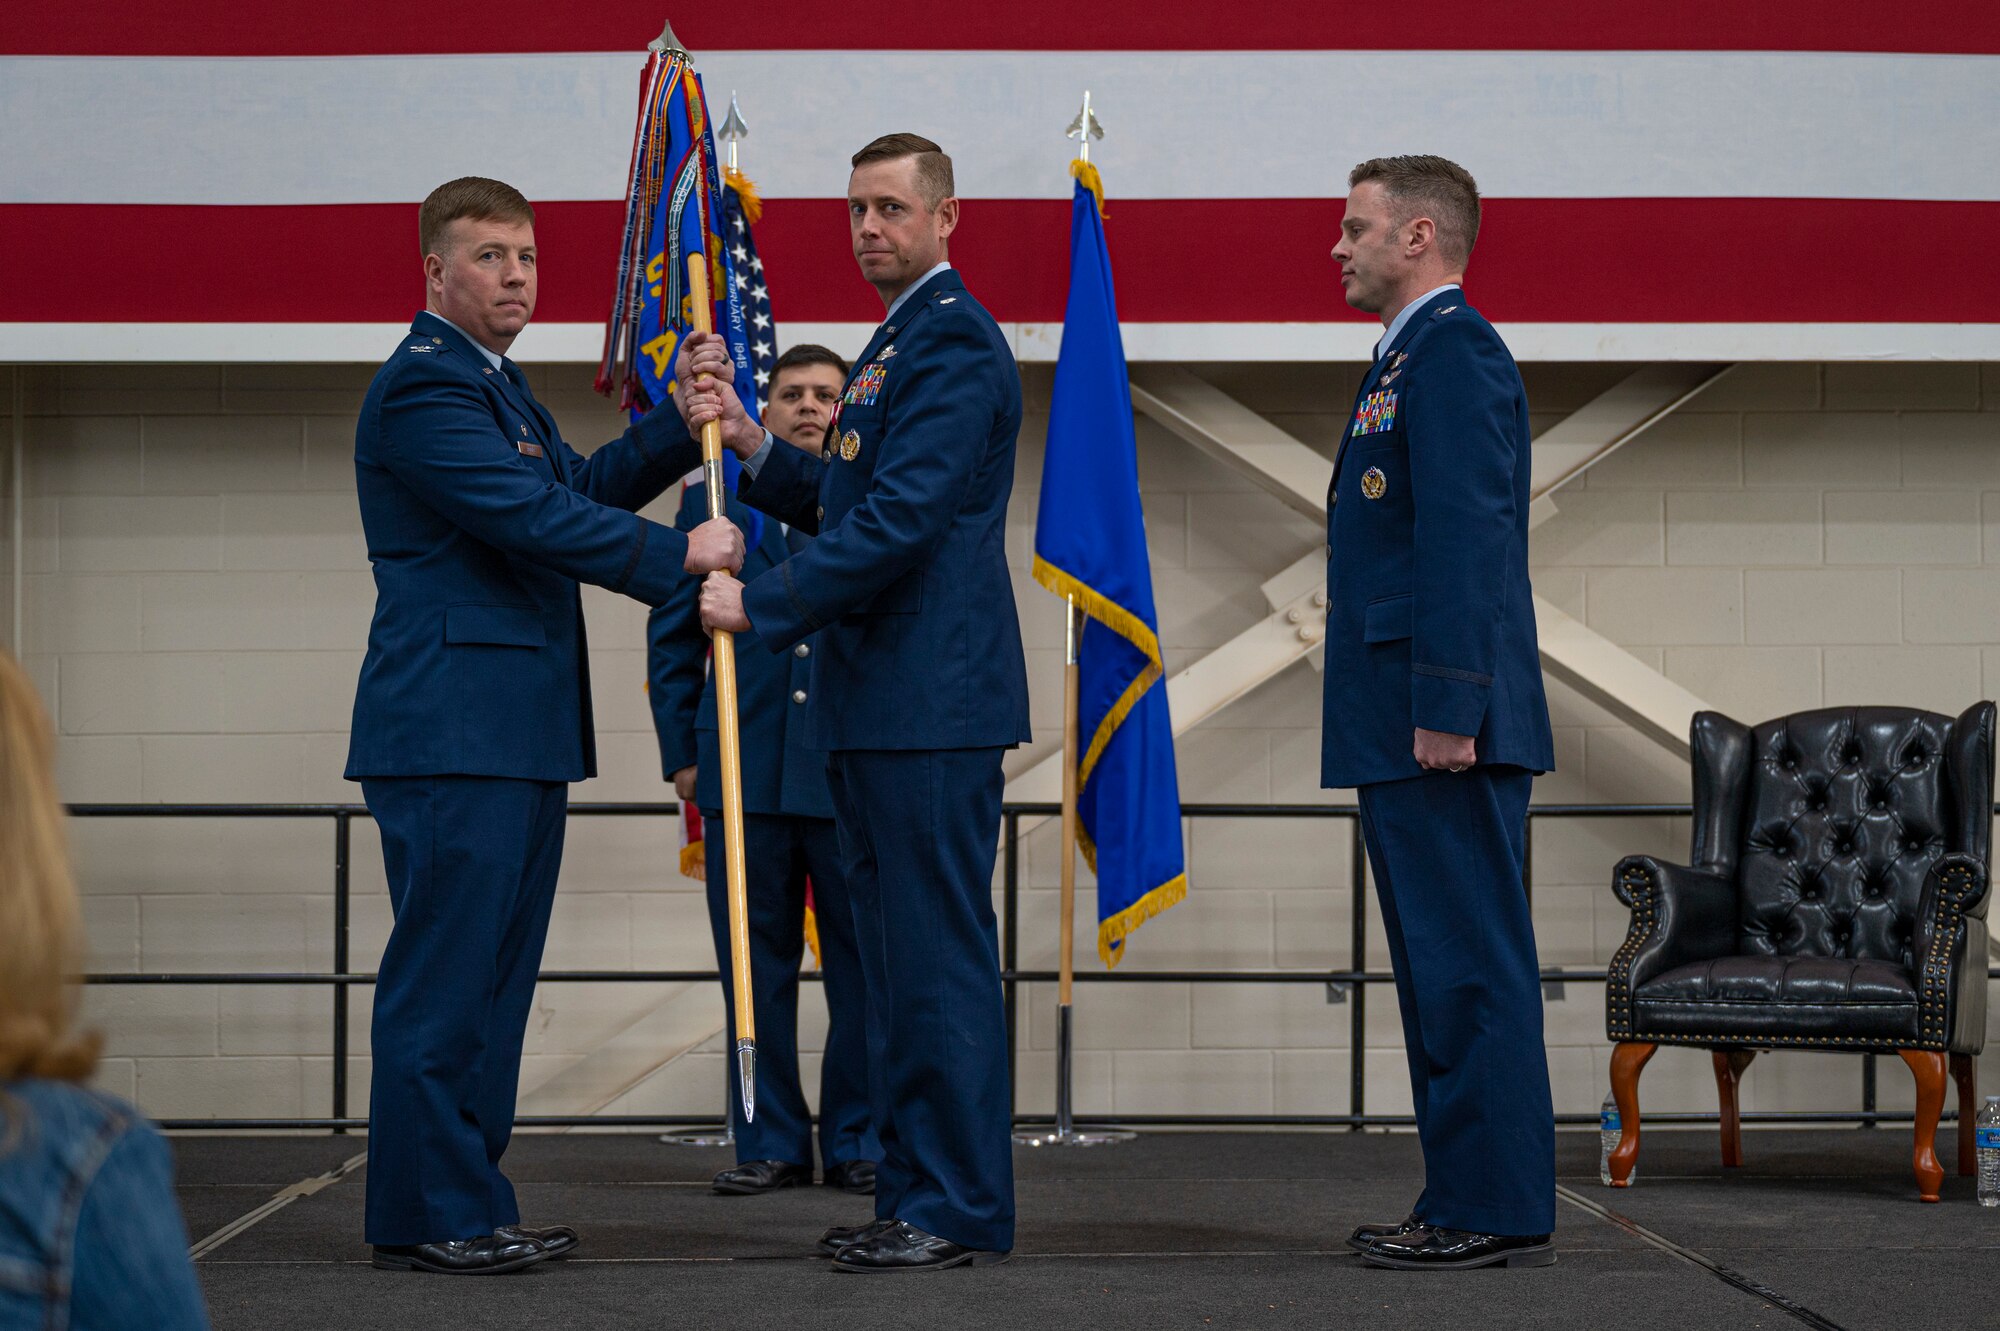 Col. John Poole, 317th Operations Group commander, takes the guidon from Lt. Col. Samuel Dunlap, outgoing 40th Airlift Squadron commander, during the 40th AS change of command ceremony at Dyess Air Force Base, Texas, Feb. 3, 2023. The 40th AS supports theater commanders' requirements with combat-delivery capability through tactical airland and airdrop operations as well as humanitarian efforts and aeromedical evacuation. (U.S. Air Force photo by Senior Airman Colin Hollowell)